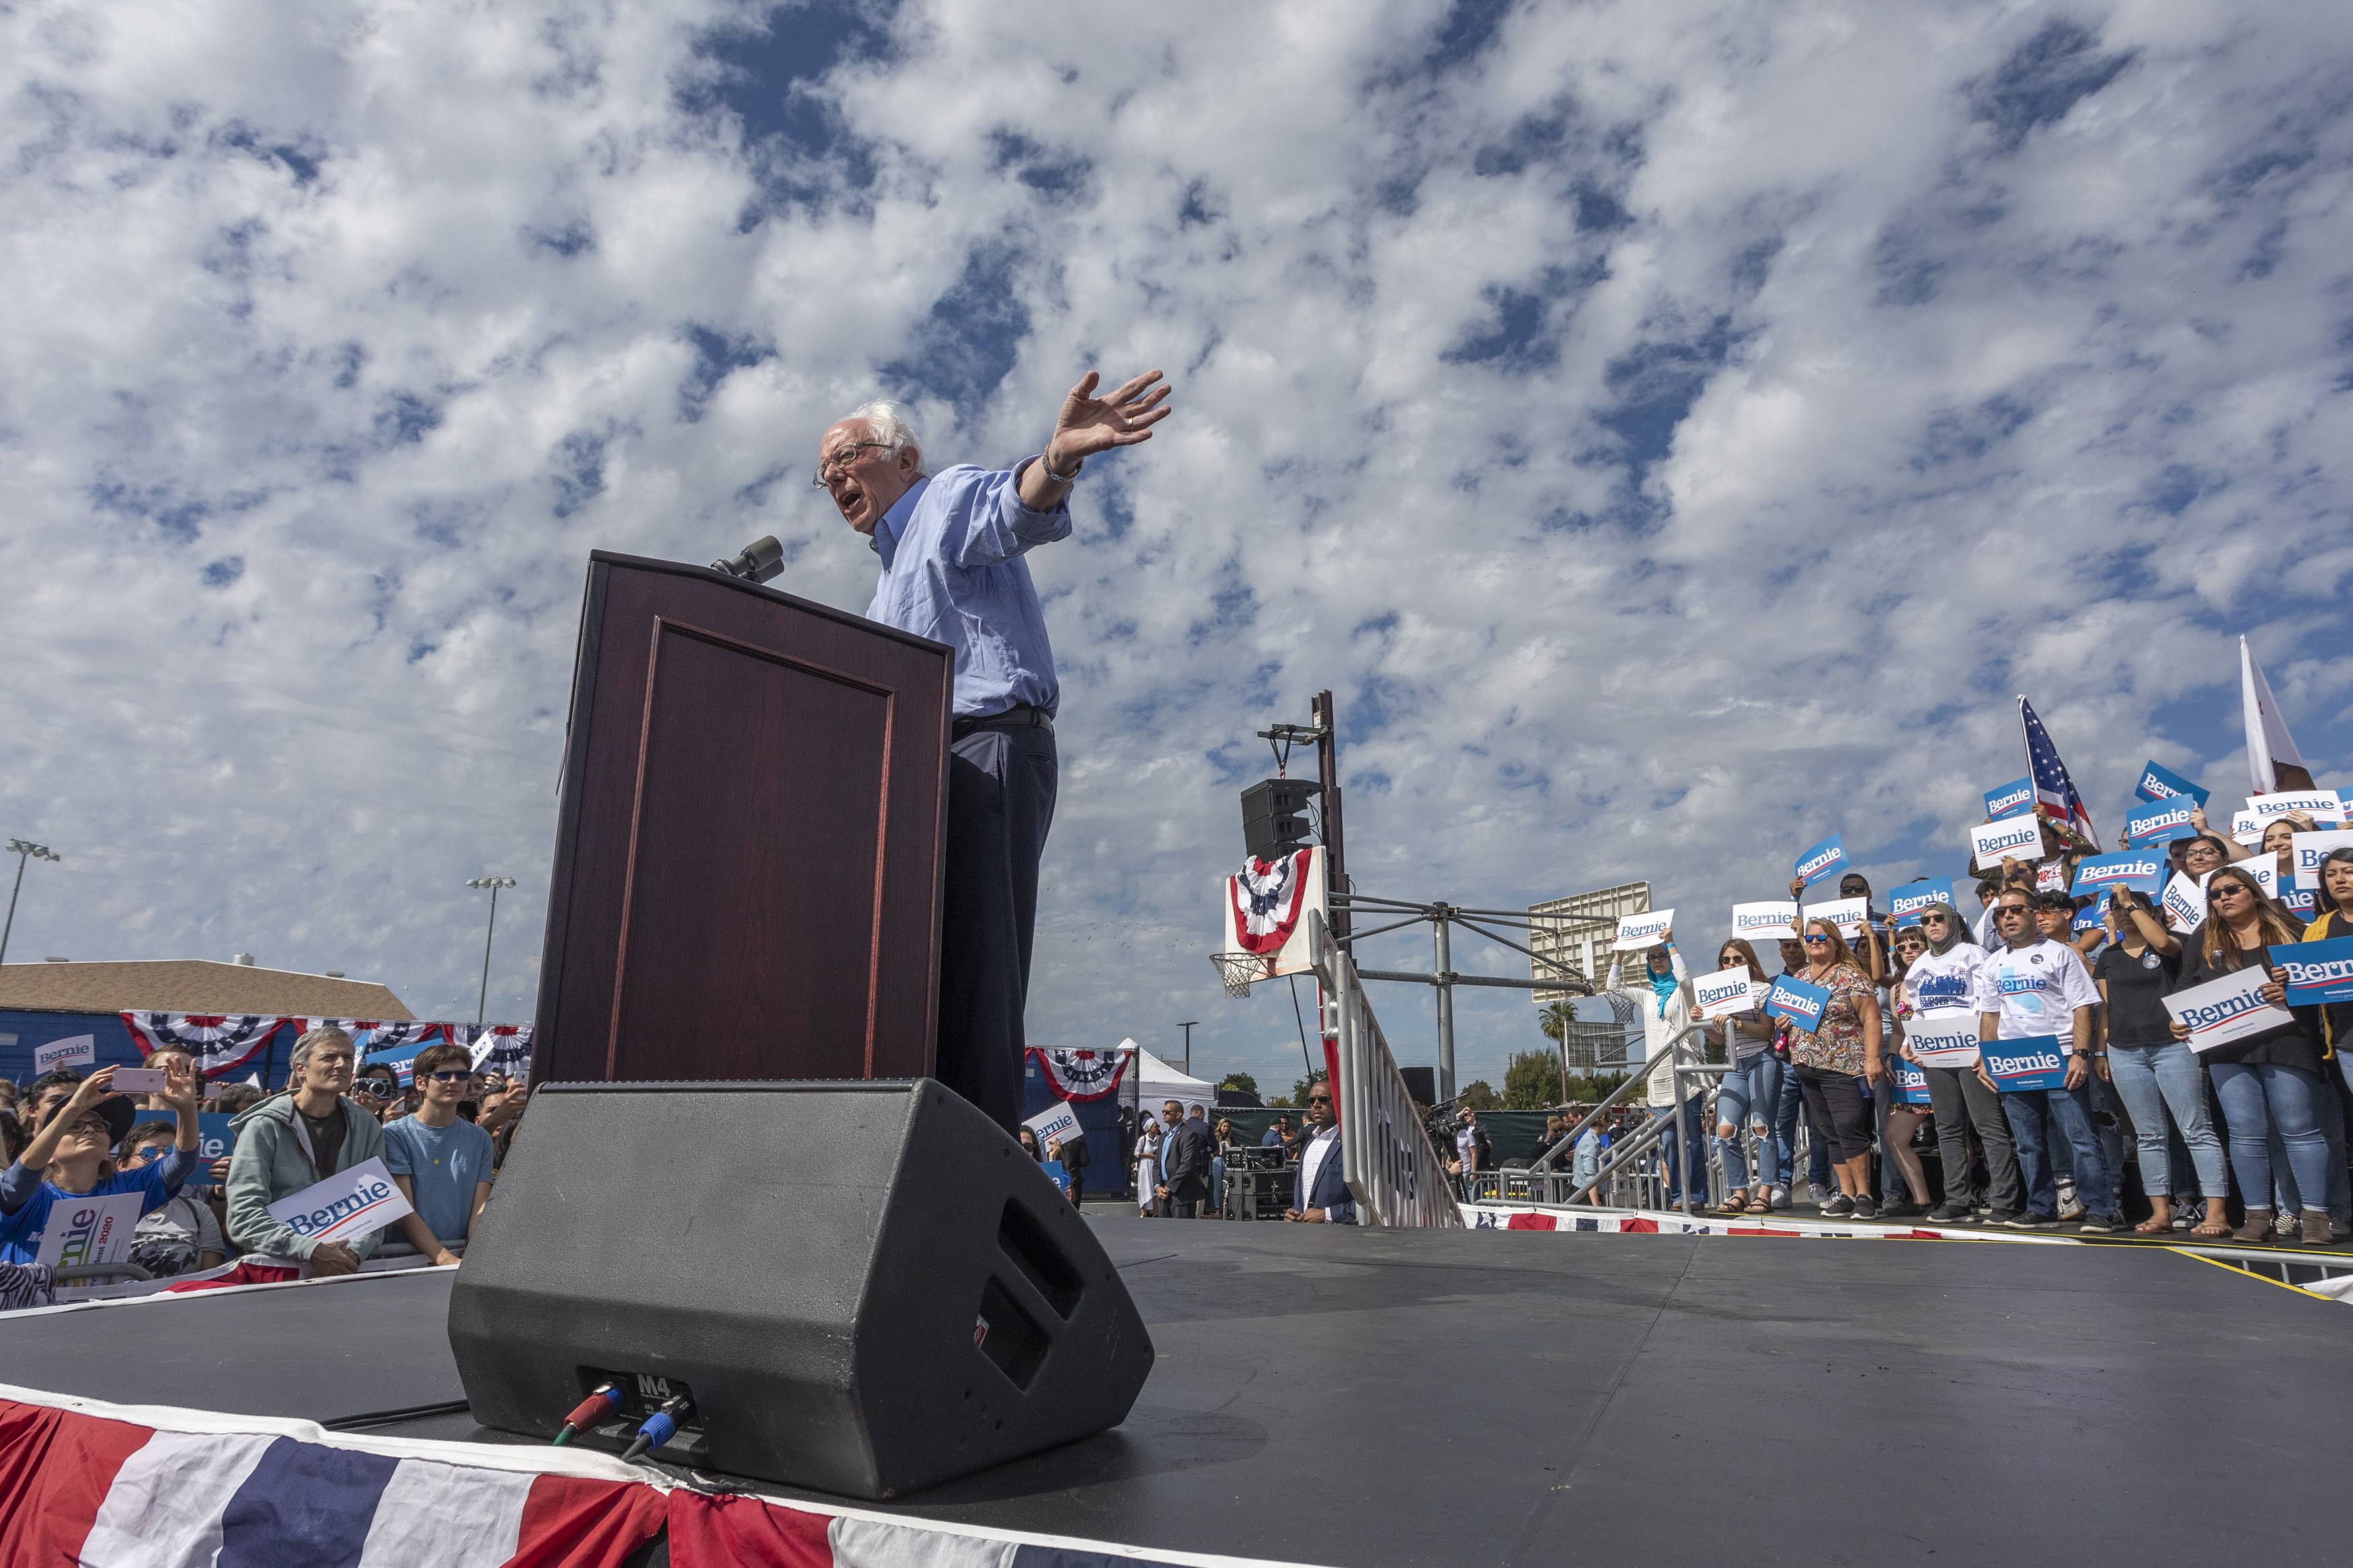 SANTA ANA, CA - FEBRUARY 21: Democratic presidential candidate Sen. Bernie Sanders (I-VT) speaks during a "Get Out the Early Vote" rally on February 21, 2020 in Santa Ana, California. Sanders is campaigning ahead of the 2020 California Democratic primary on March 3. California moved its Democratic primary from June to ahead of Super Tuesday to have greater political influence as an early primary state. (Photo by David McNew/Getty Images)